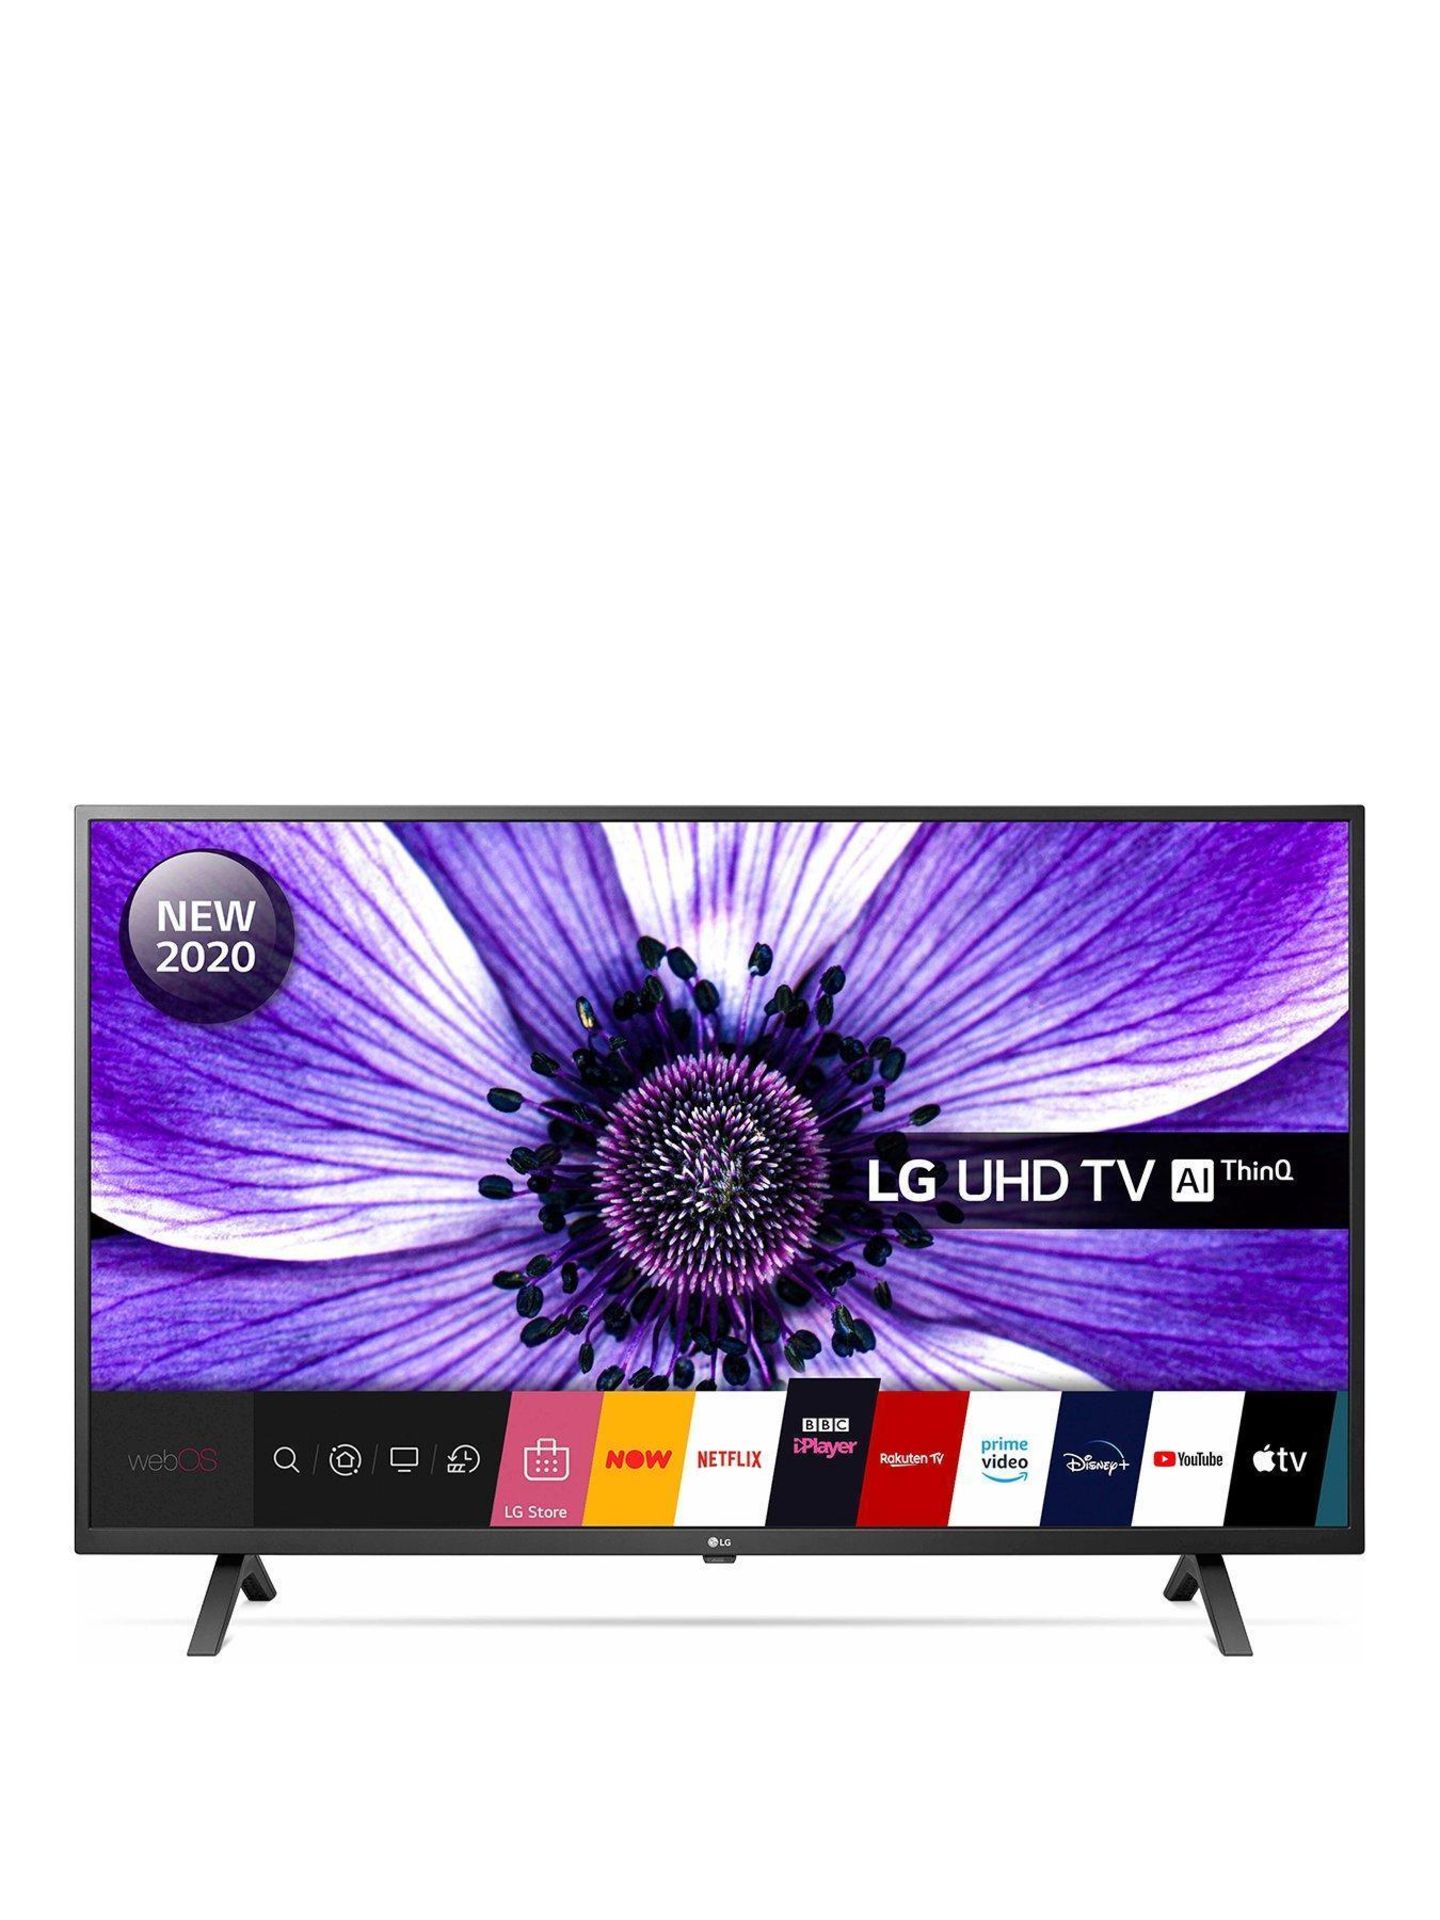 Lg 55un70006la 55 inch 4k uhd, hdr, smart tv [black] 79x124x28cm rrp: £778.0 - Image 2 of 2